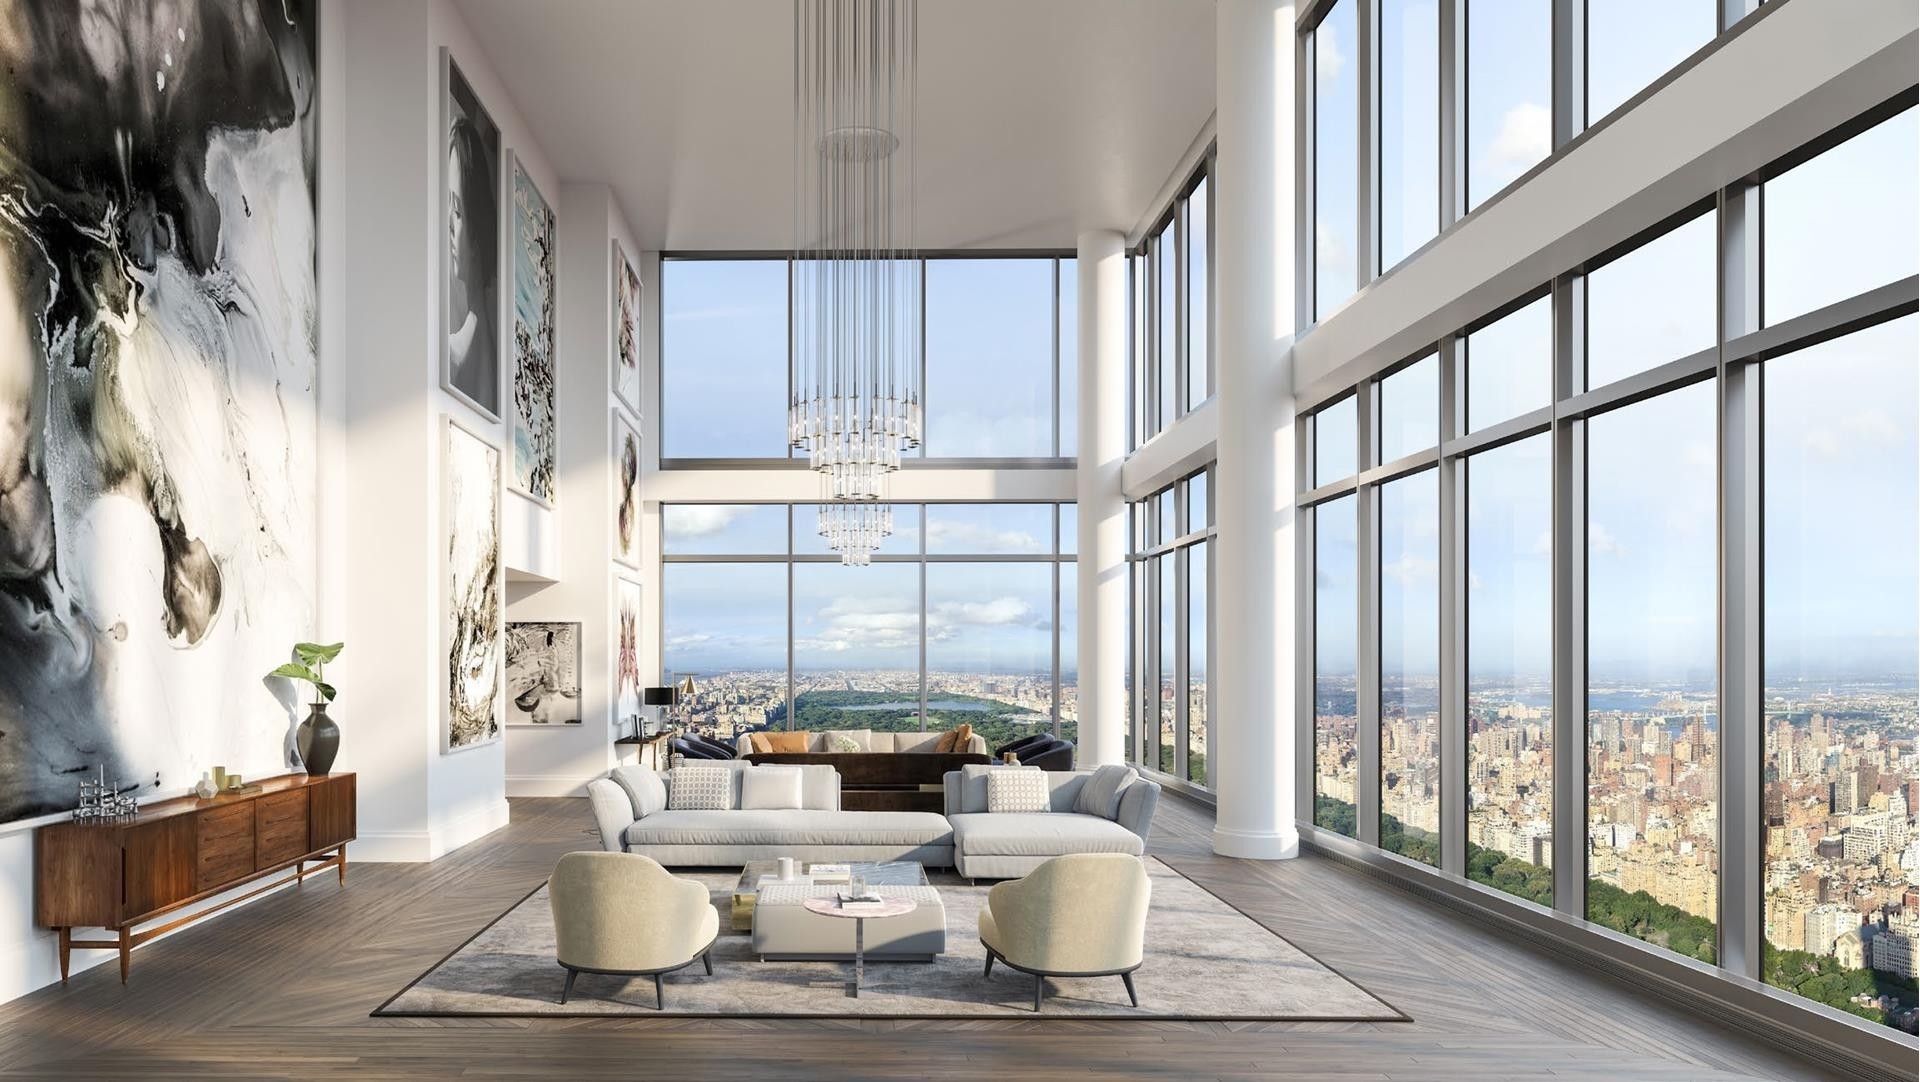 Condominium for Sale at Central Park Tower, 217 W 57TH ST, 107 Midtown West, New York, NY 10019